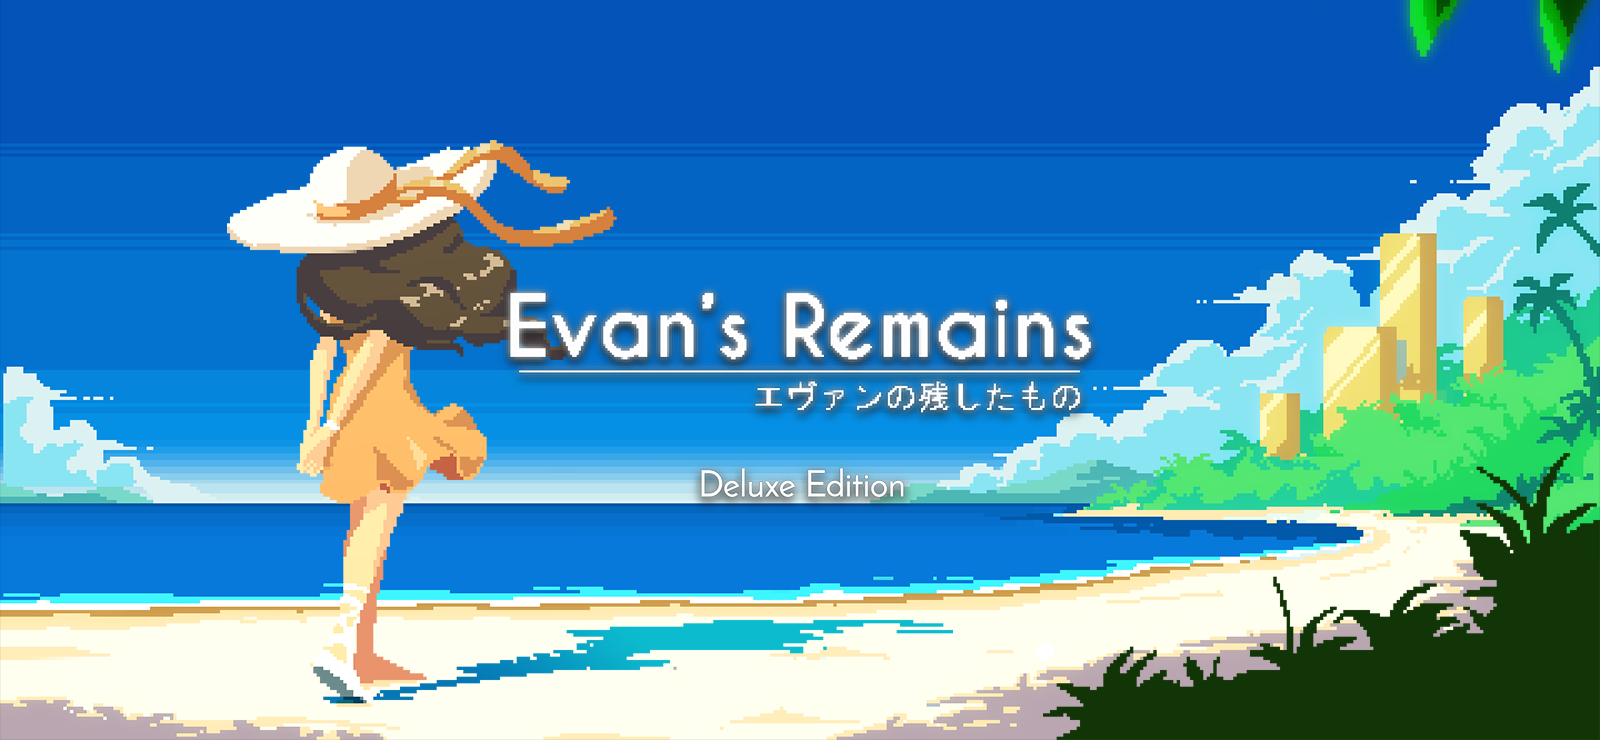 Evan's Remains Deluxe Edition